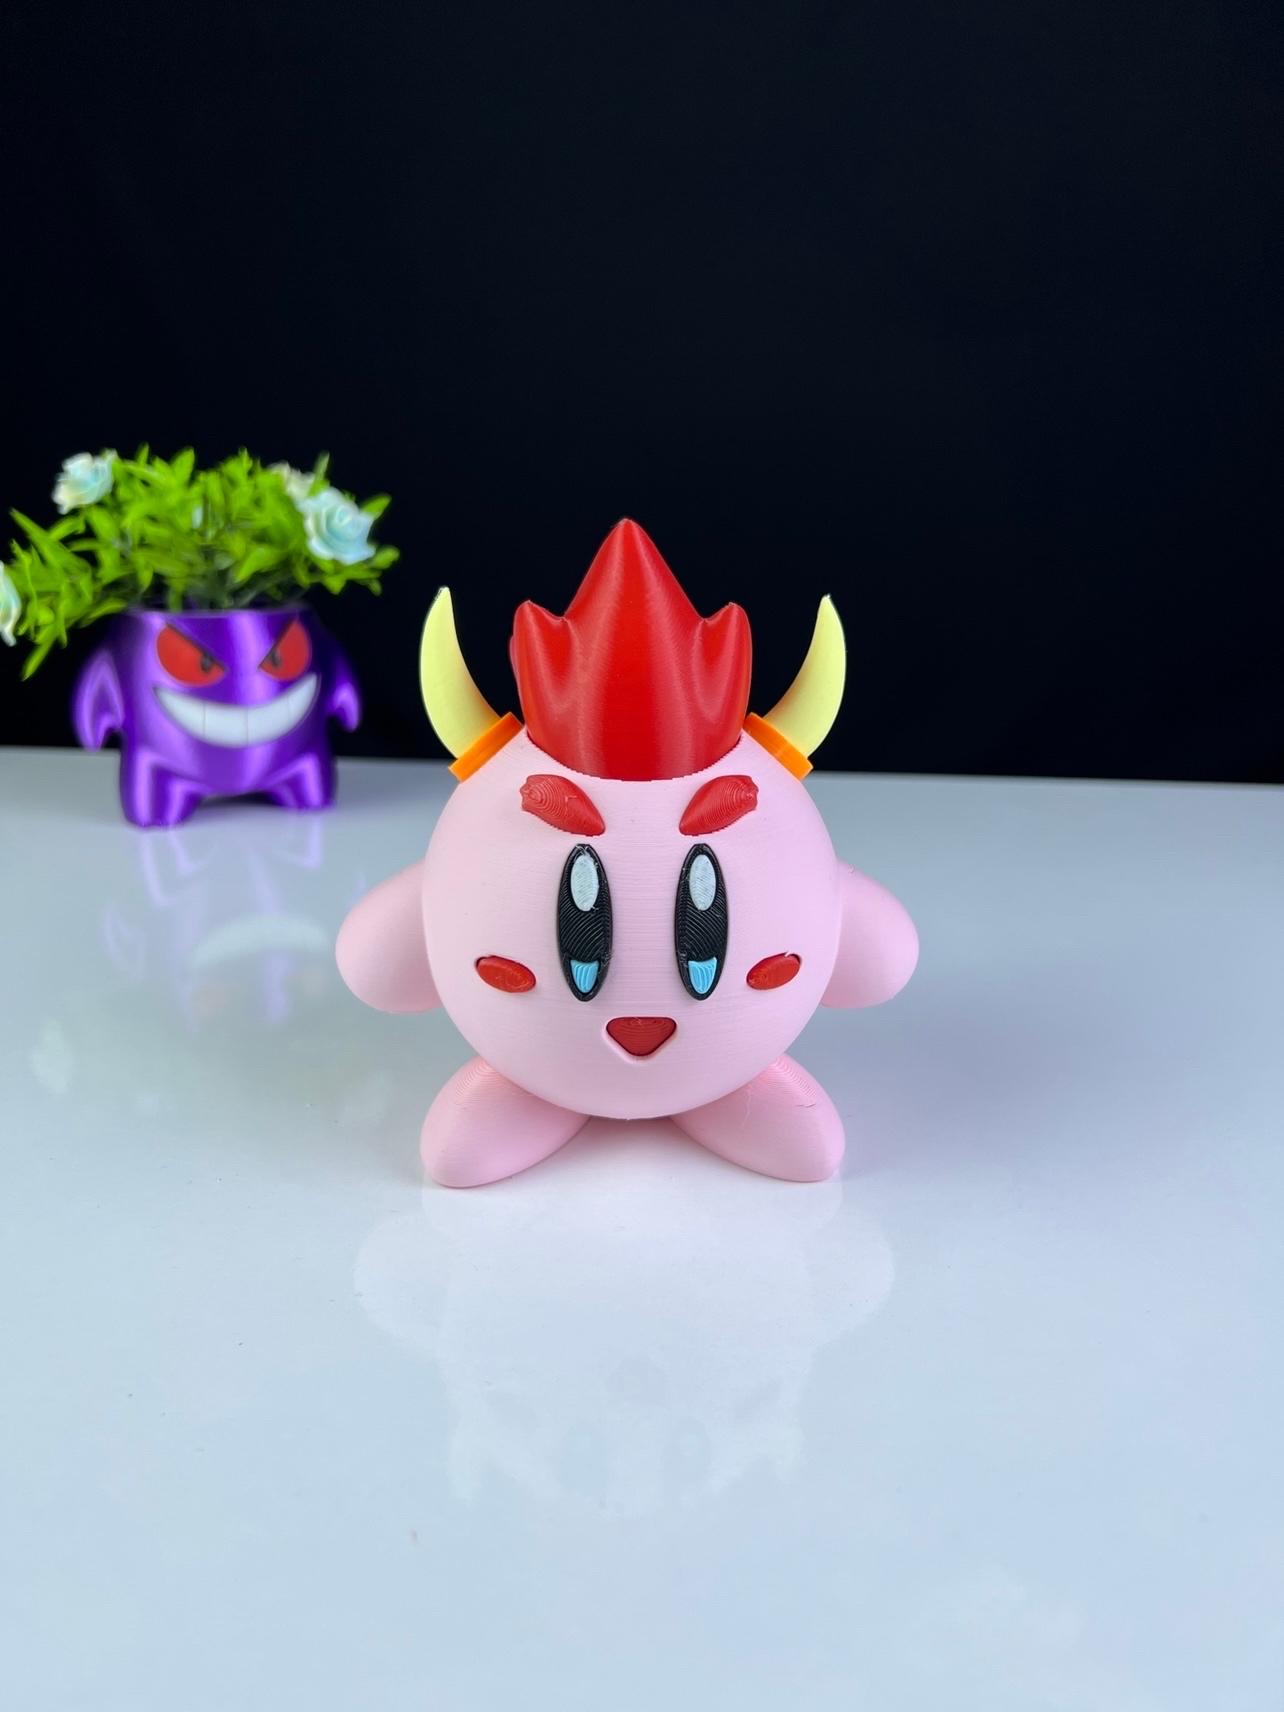 Bowser Kirby - Multipart 3d model